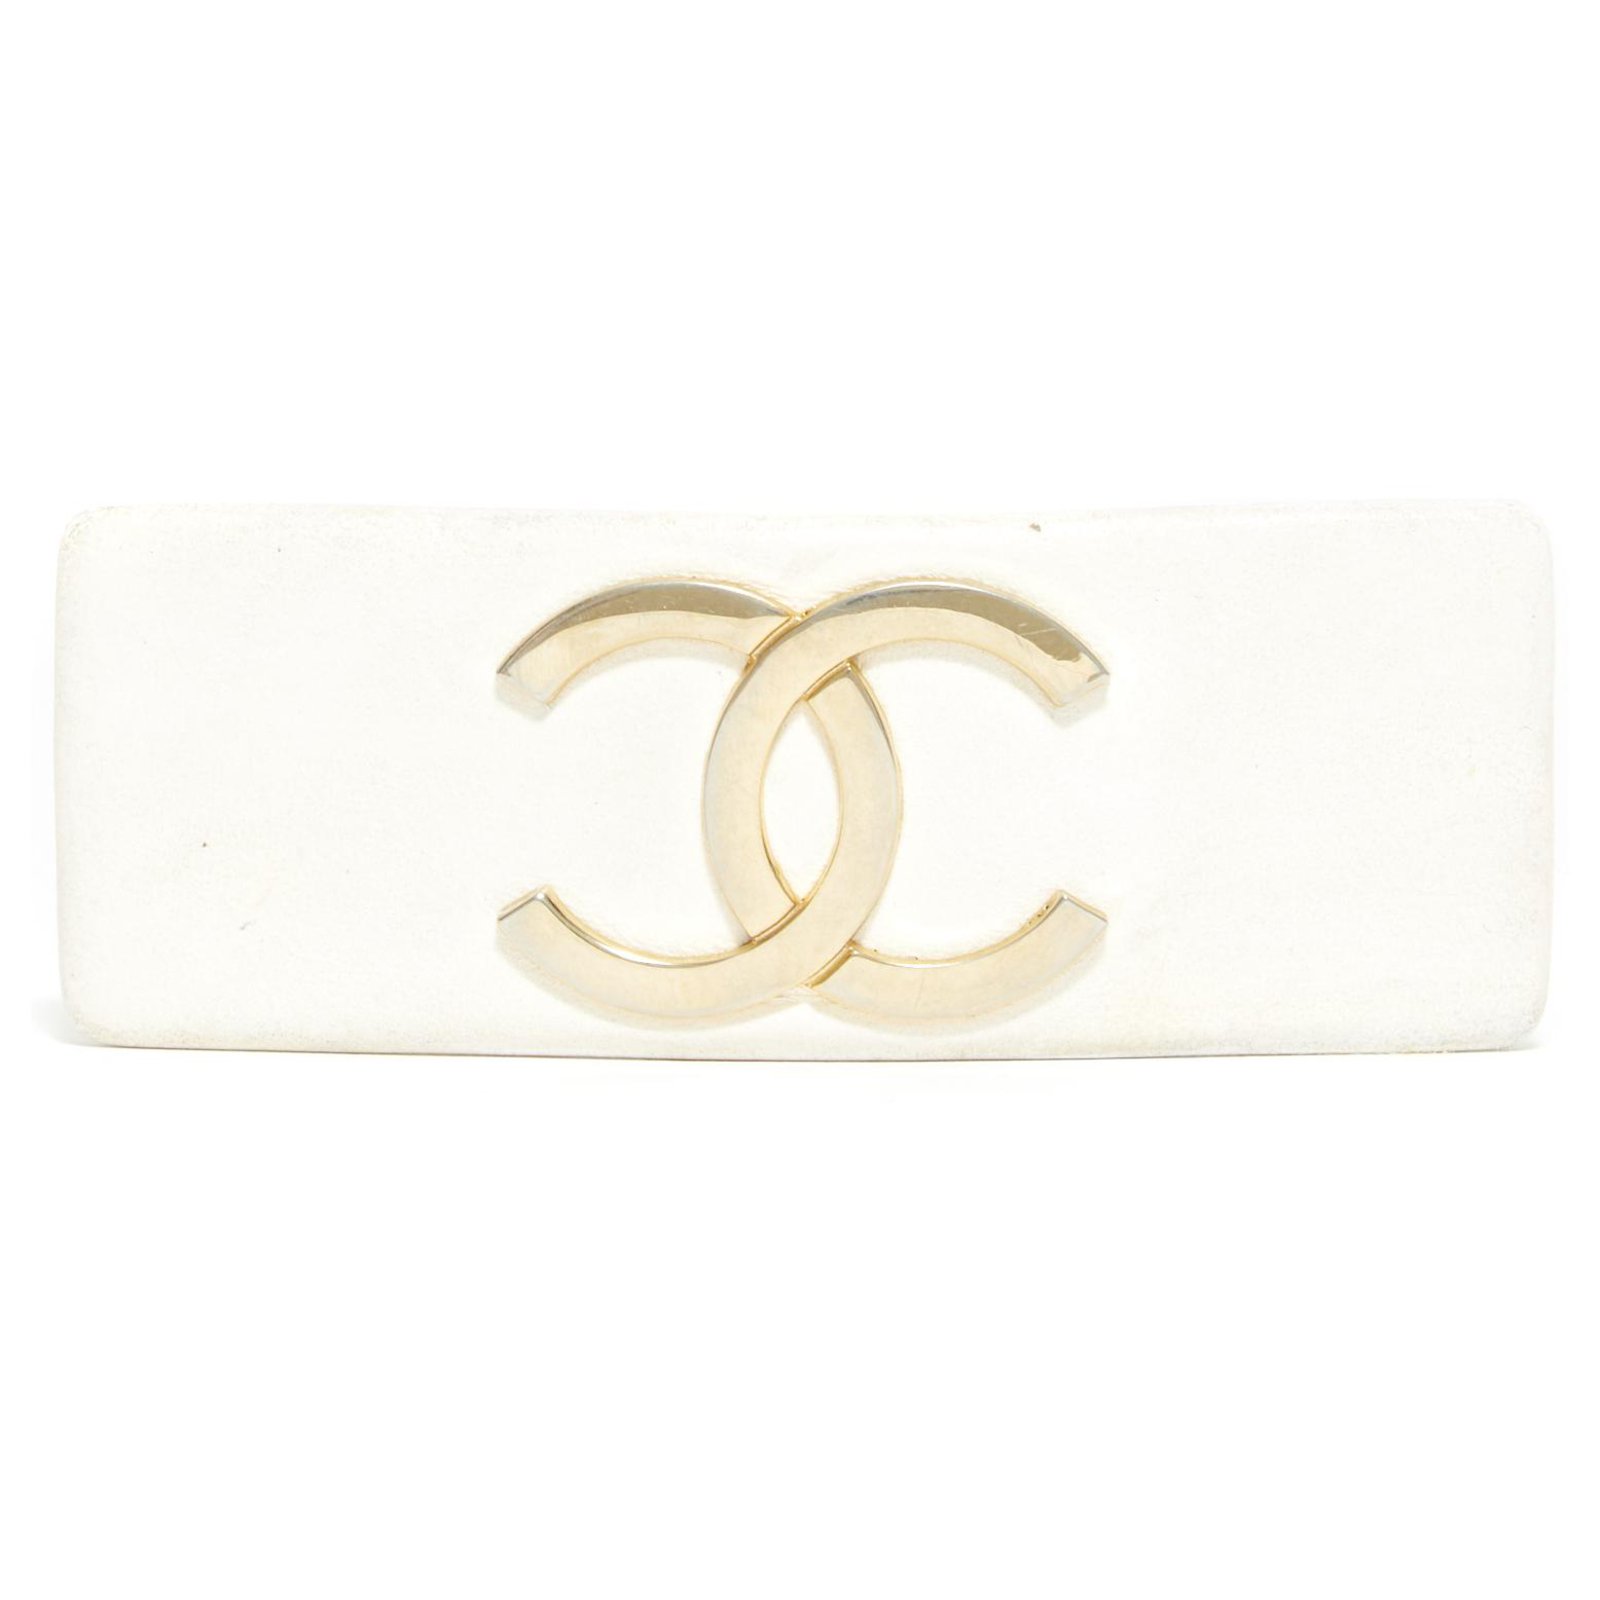 Cc hair accessory Chanel Gold in Gold plated - 31001437